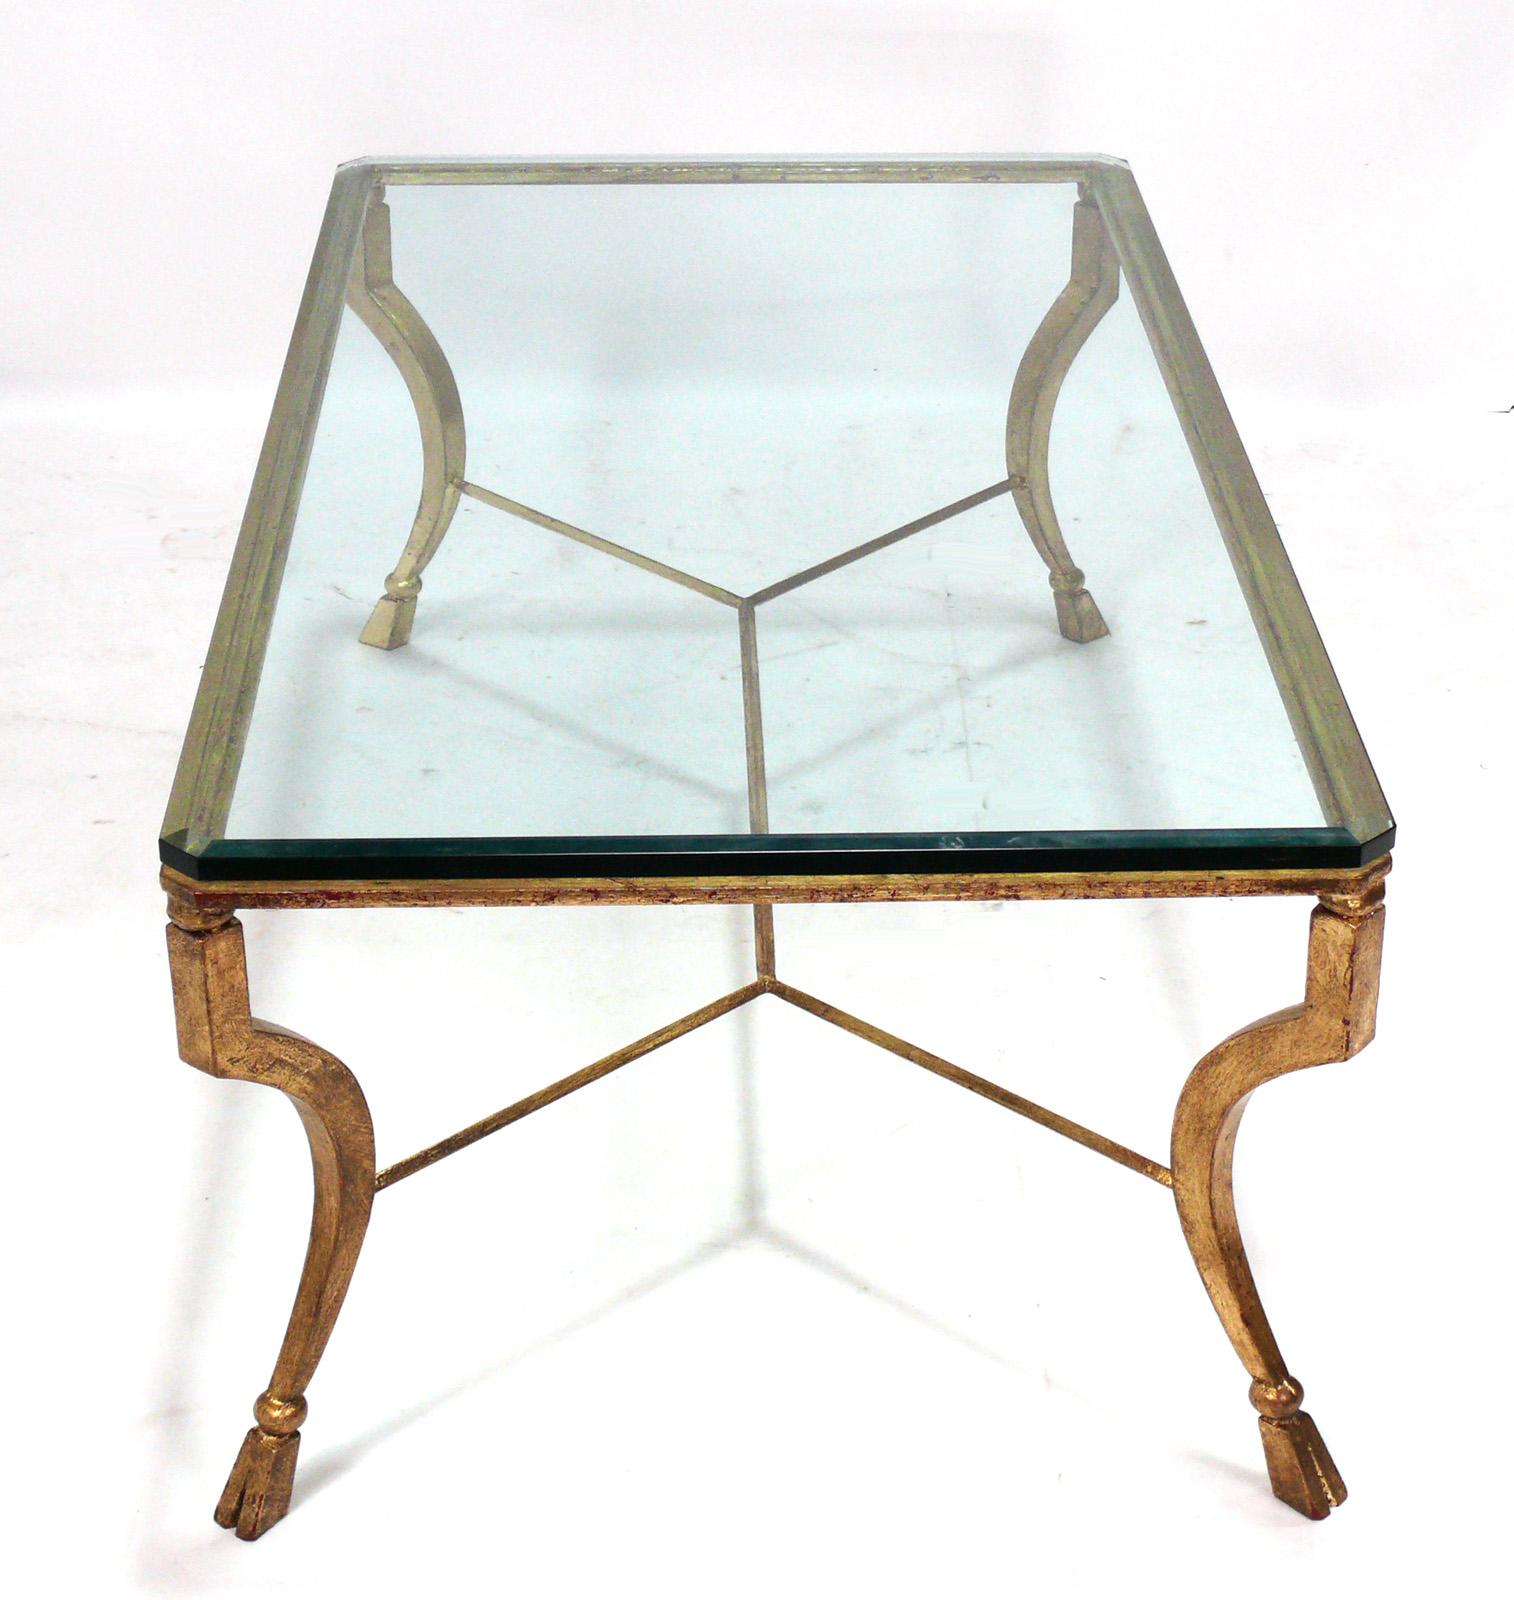 Mid-20th Century French Gilt Iron Coffee Table Attributed to Maison Ramsay For Sale